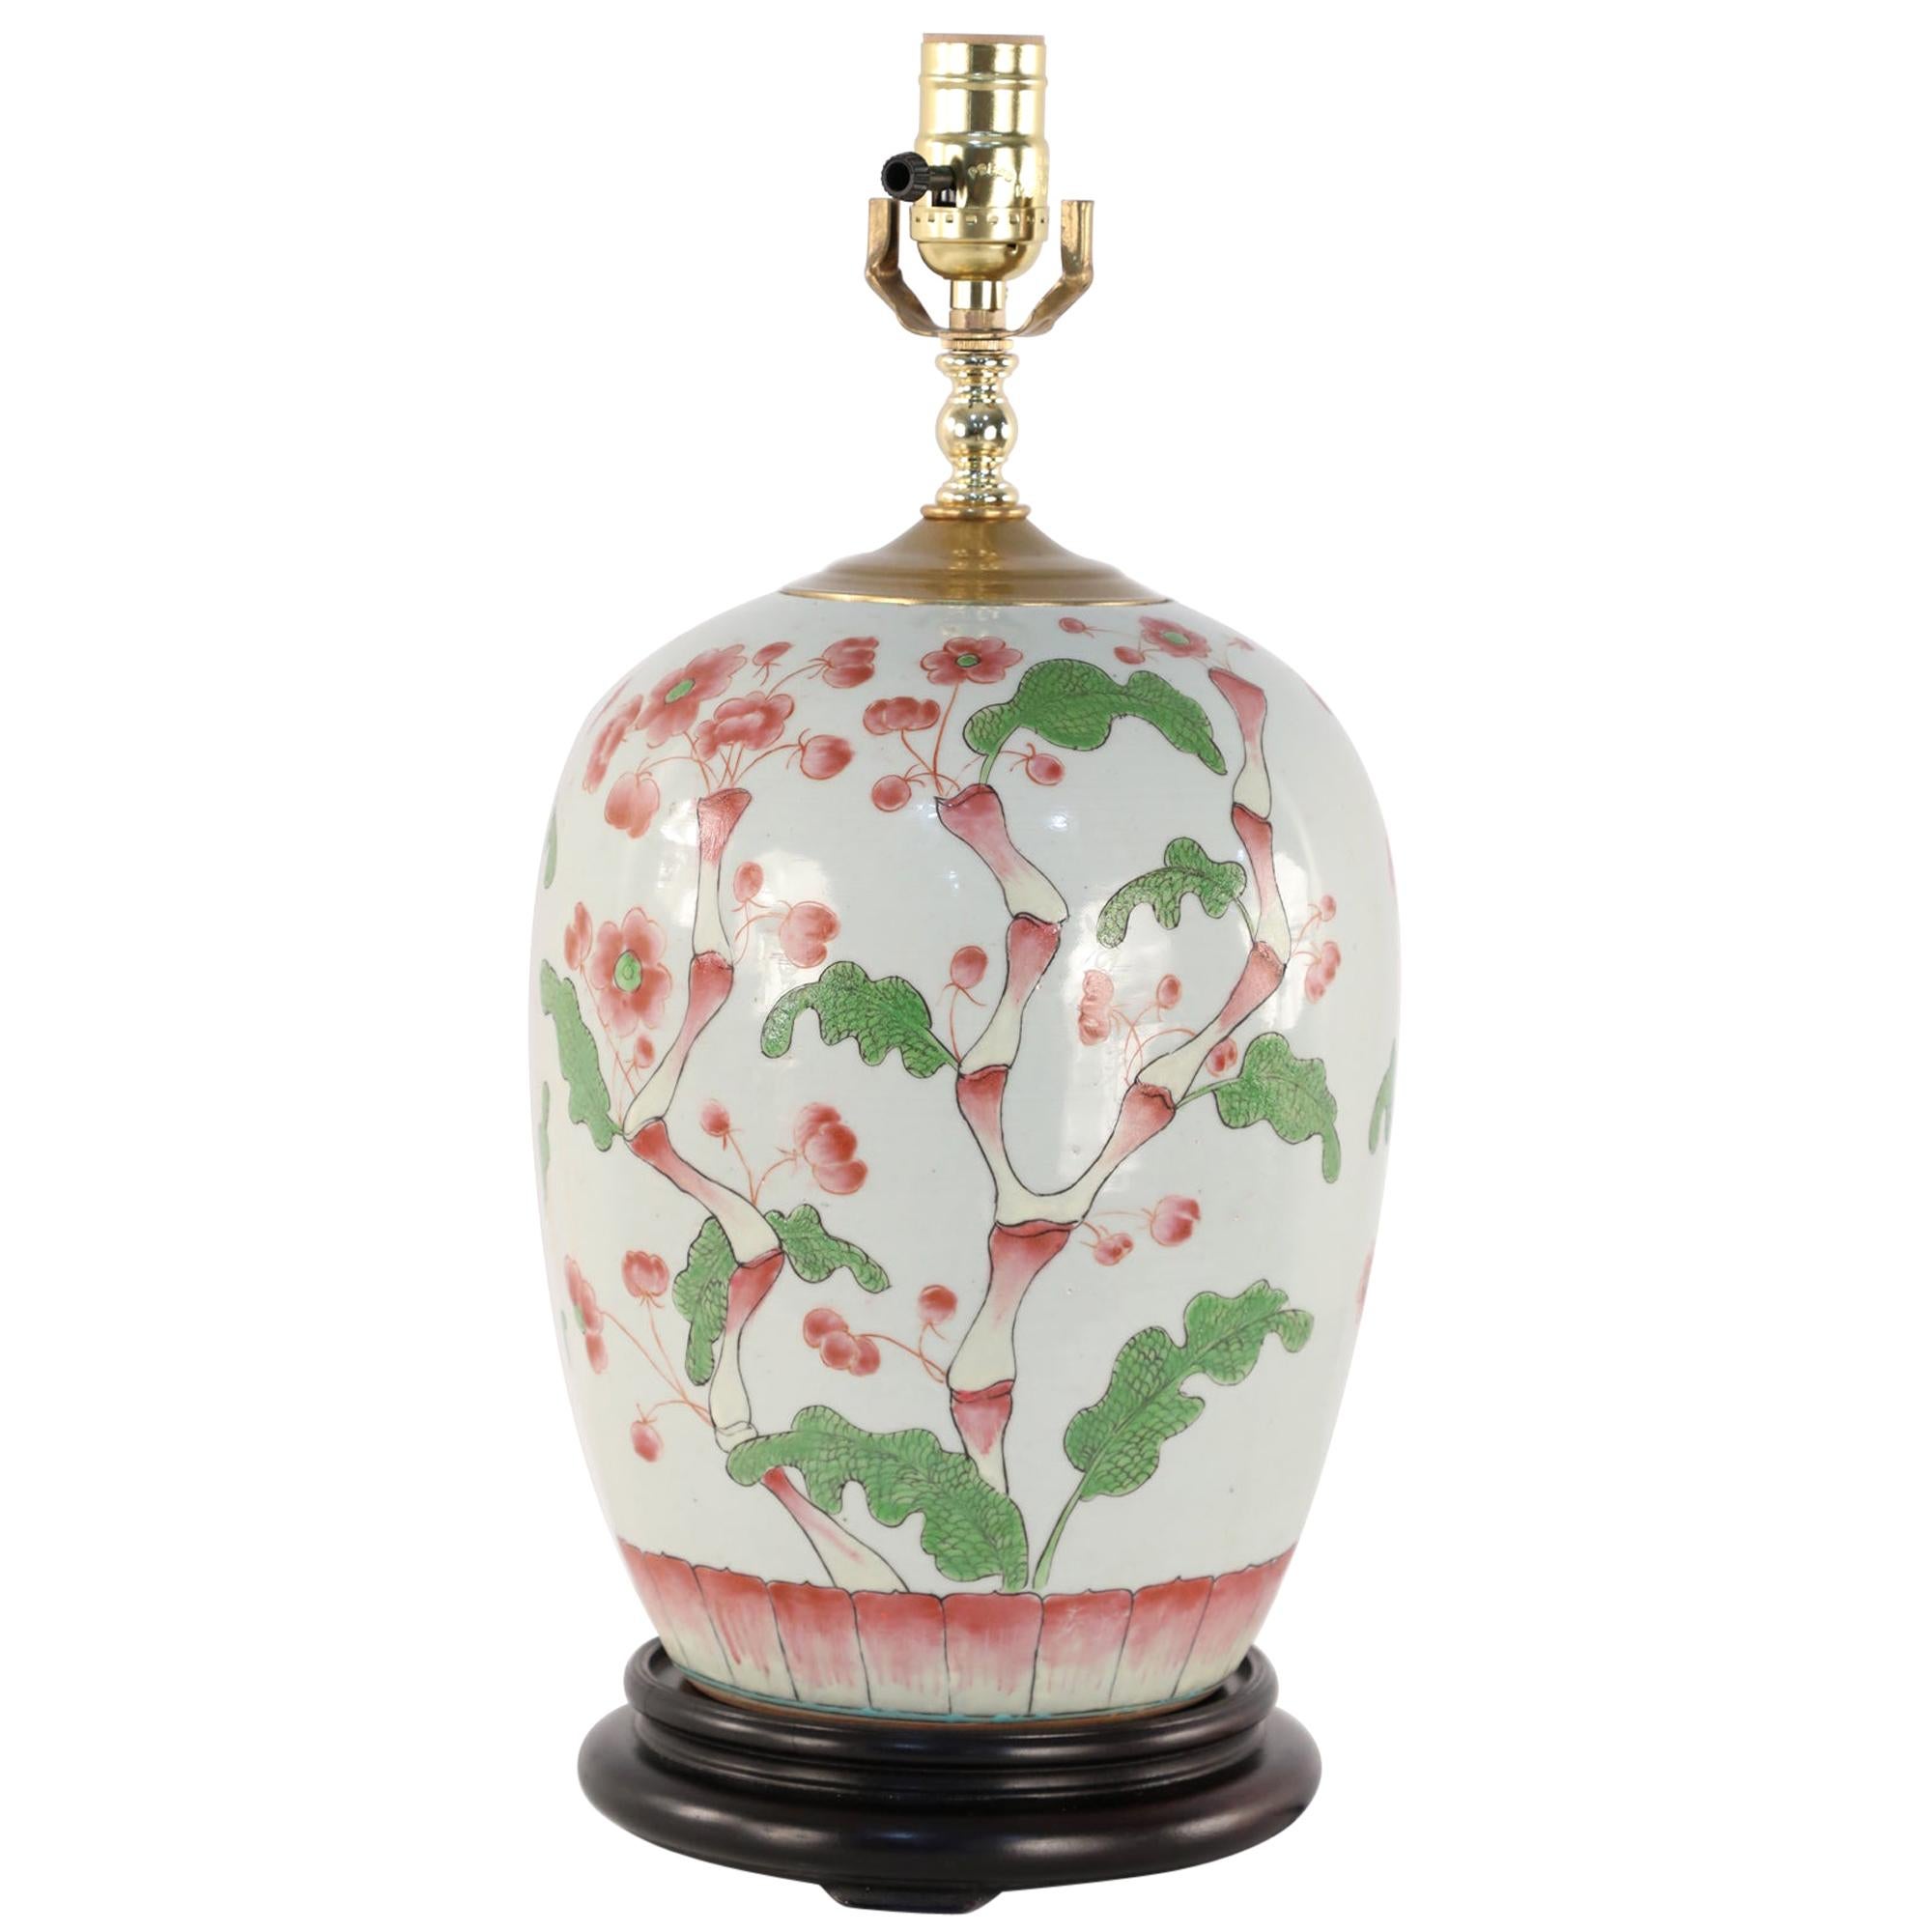 Chinese Pink Cherry Blossom Tree Motif Table Lamp Mounted on a Wooden Base